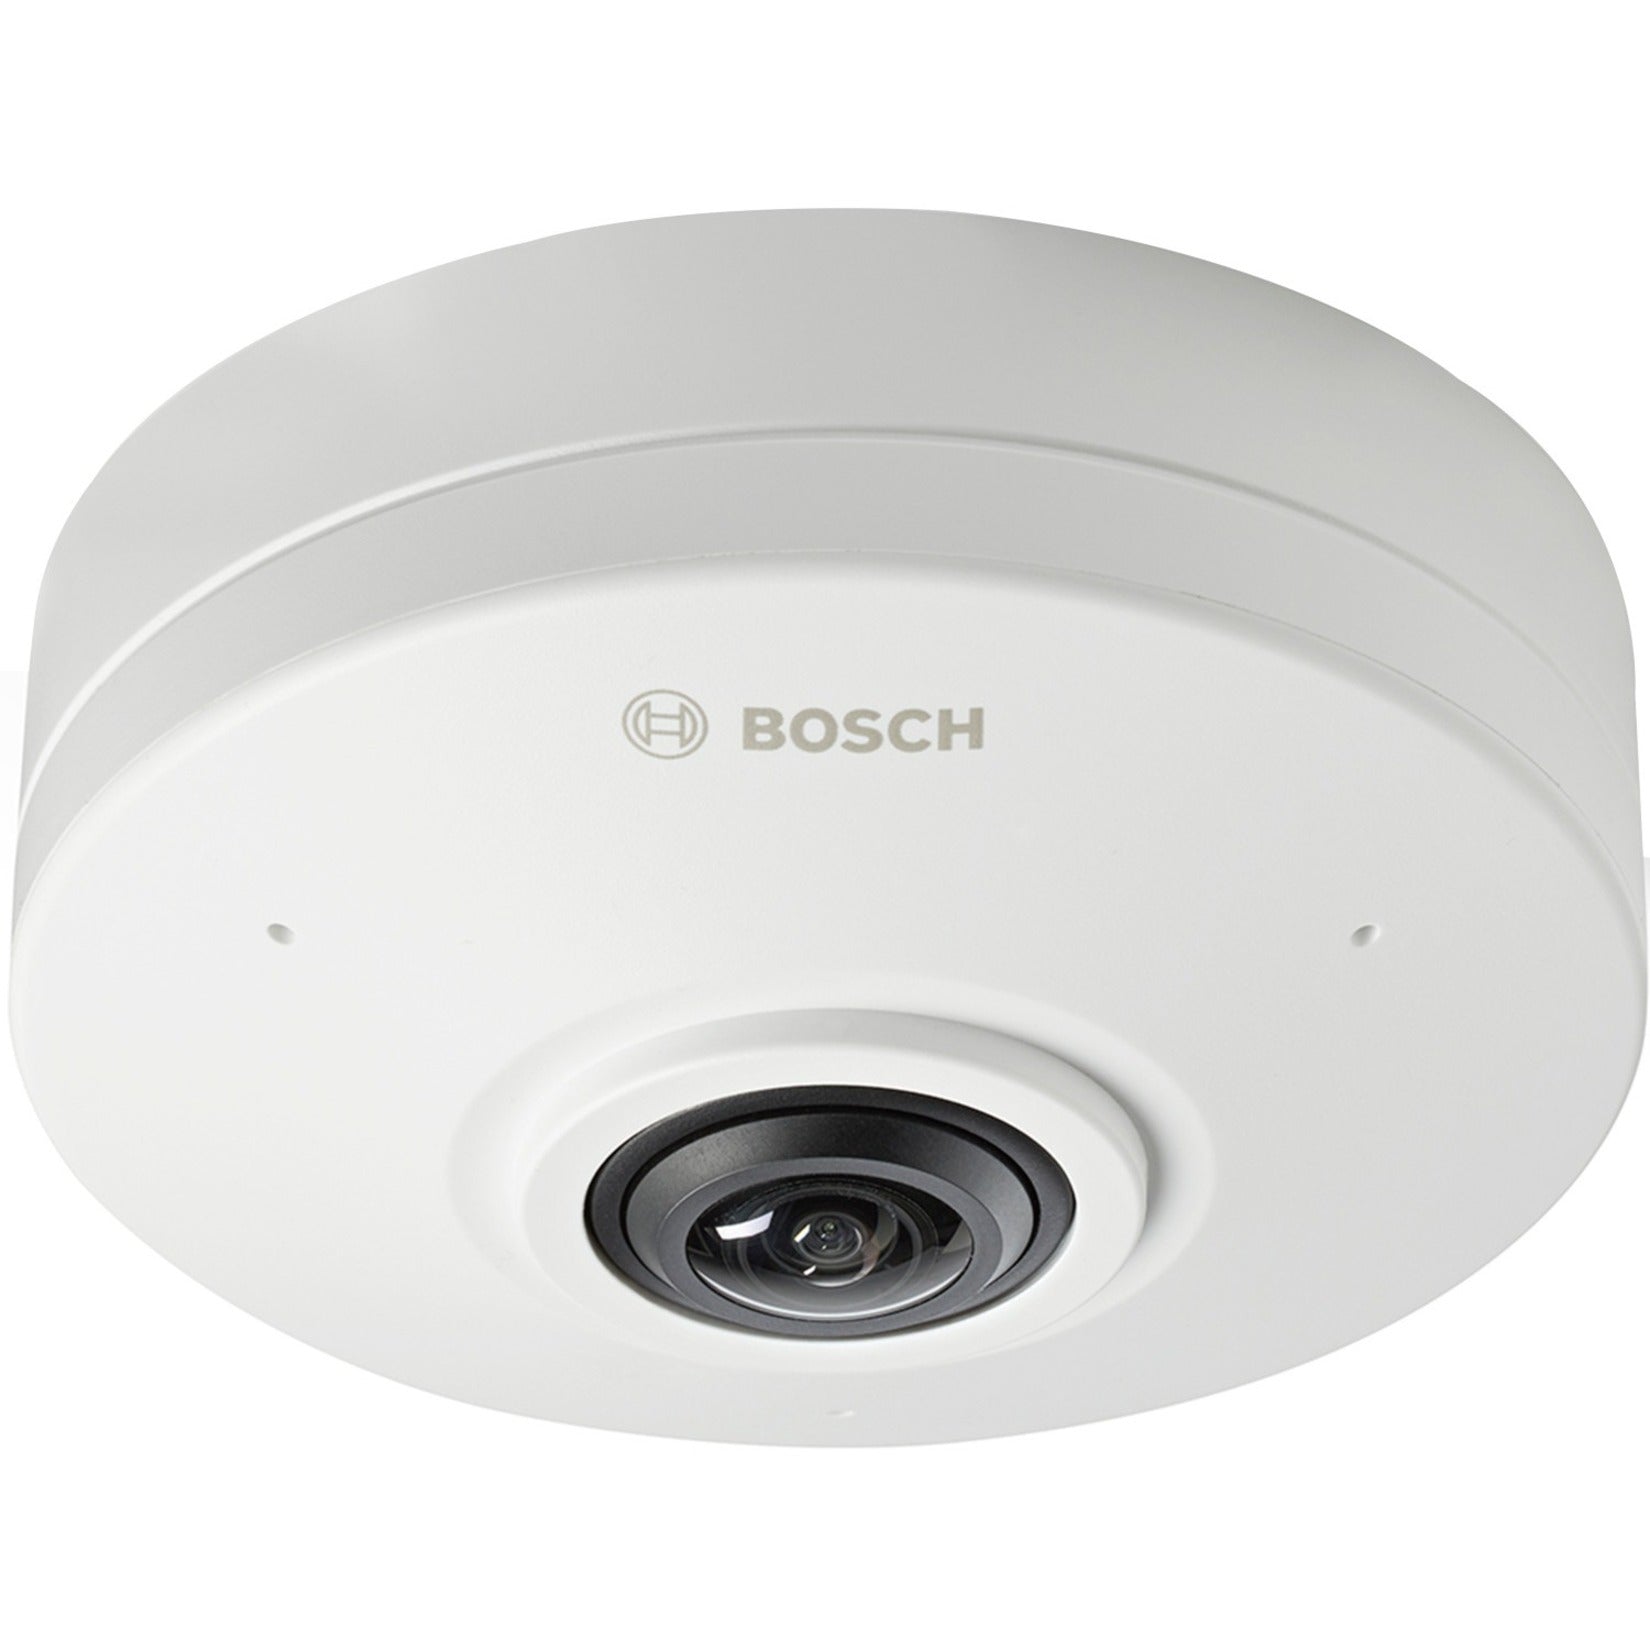 Bosch 6MP 360 Panoramic Network Camera - Wide Dynamic Range, Privacy Masking [Discontinued]